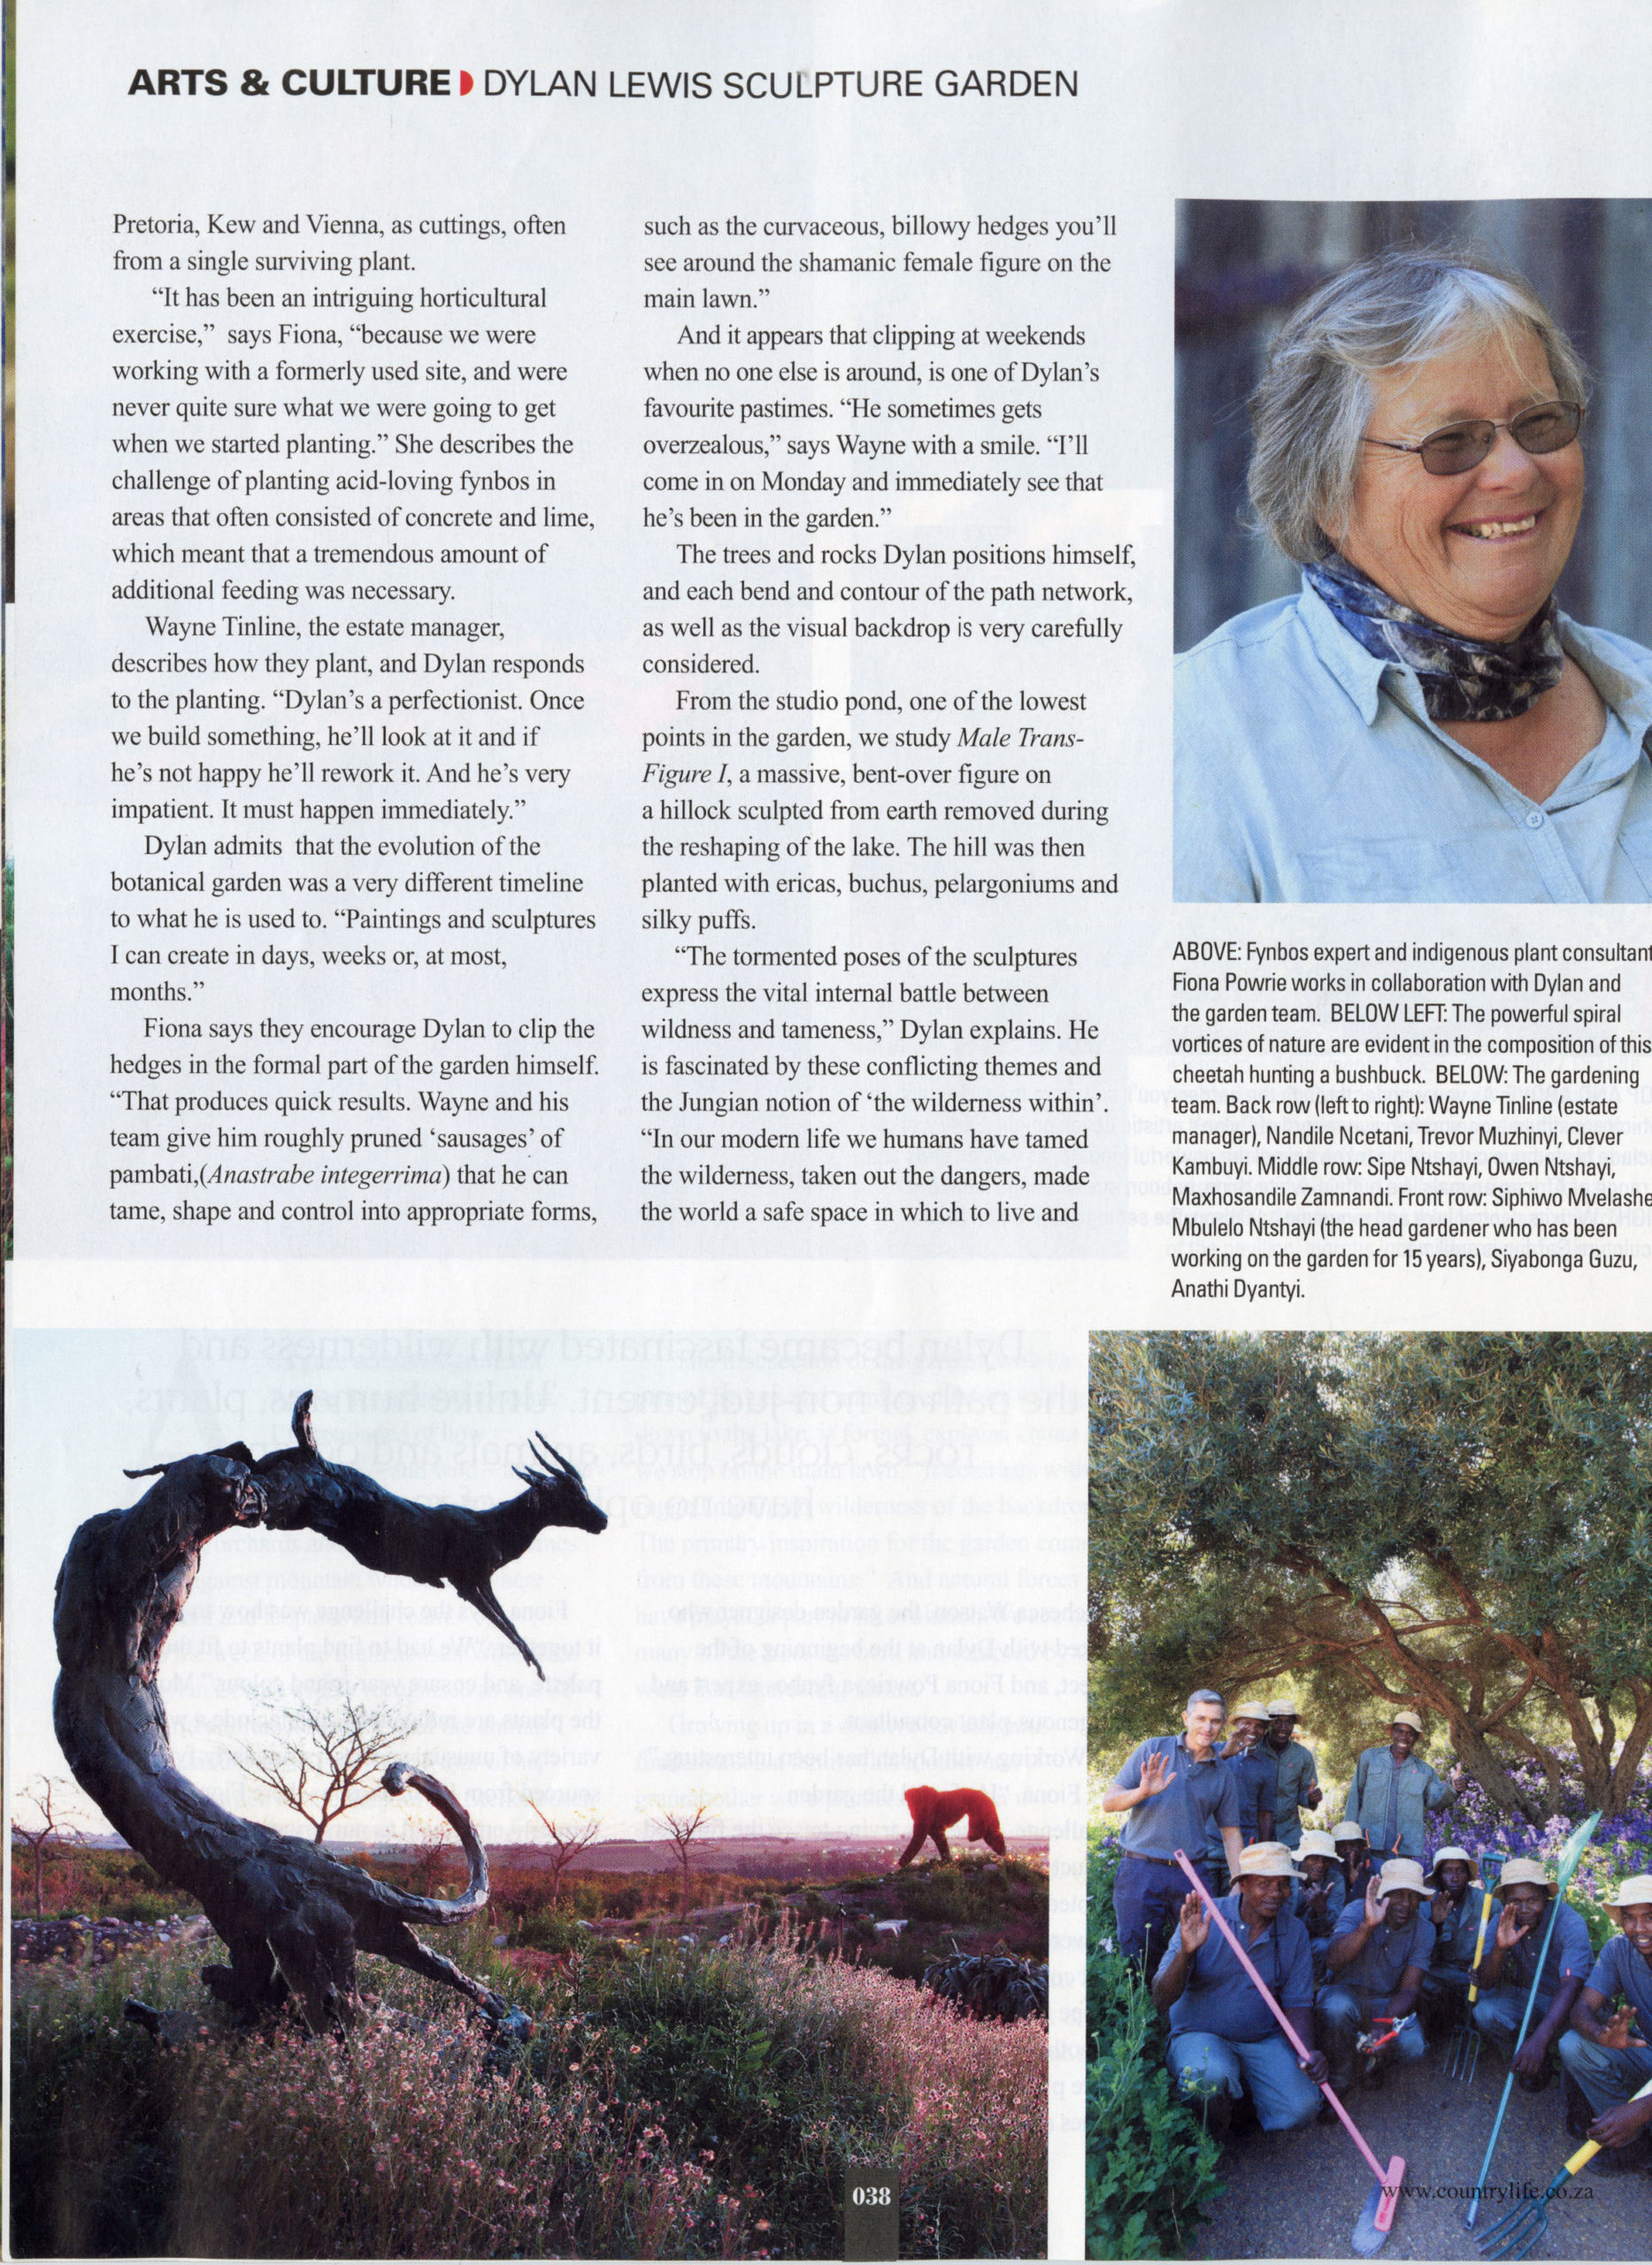 Country Life Aug 2019 pg 38